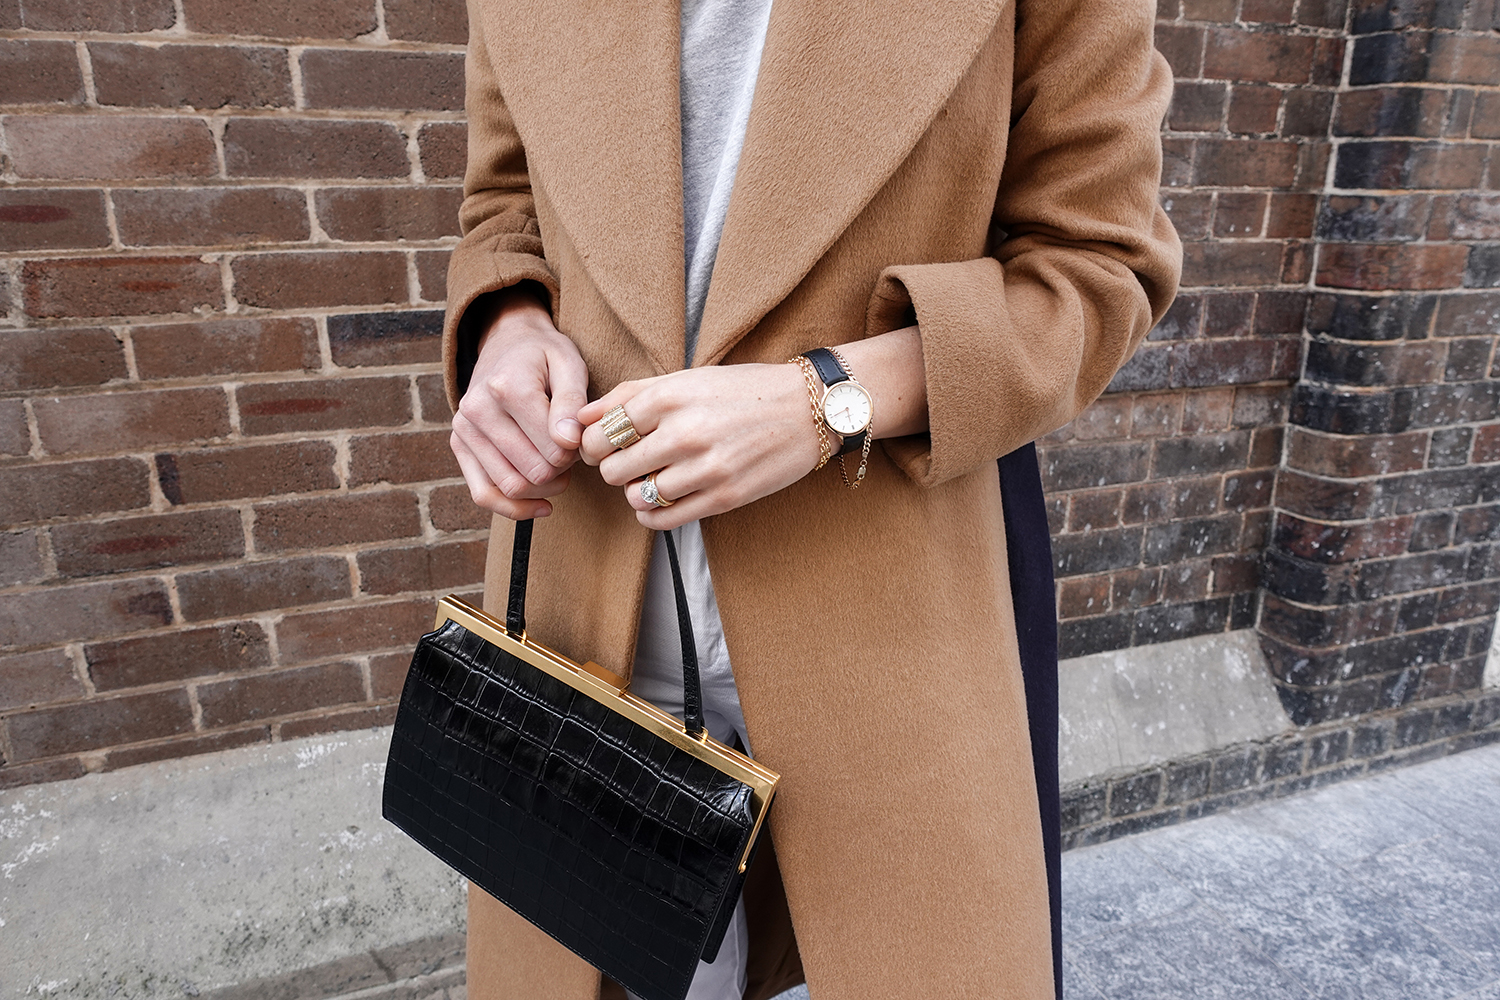 Neutral outfit in a minimal style wearing a camel coat and white jeans